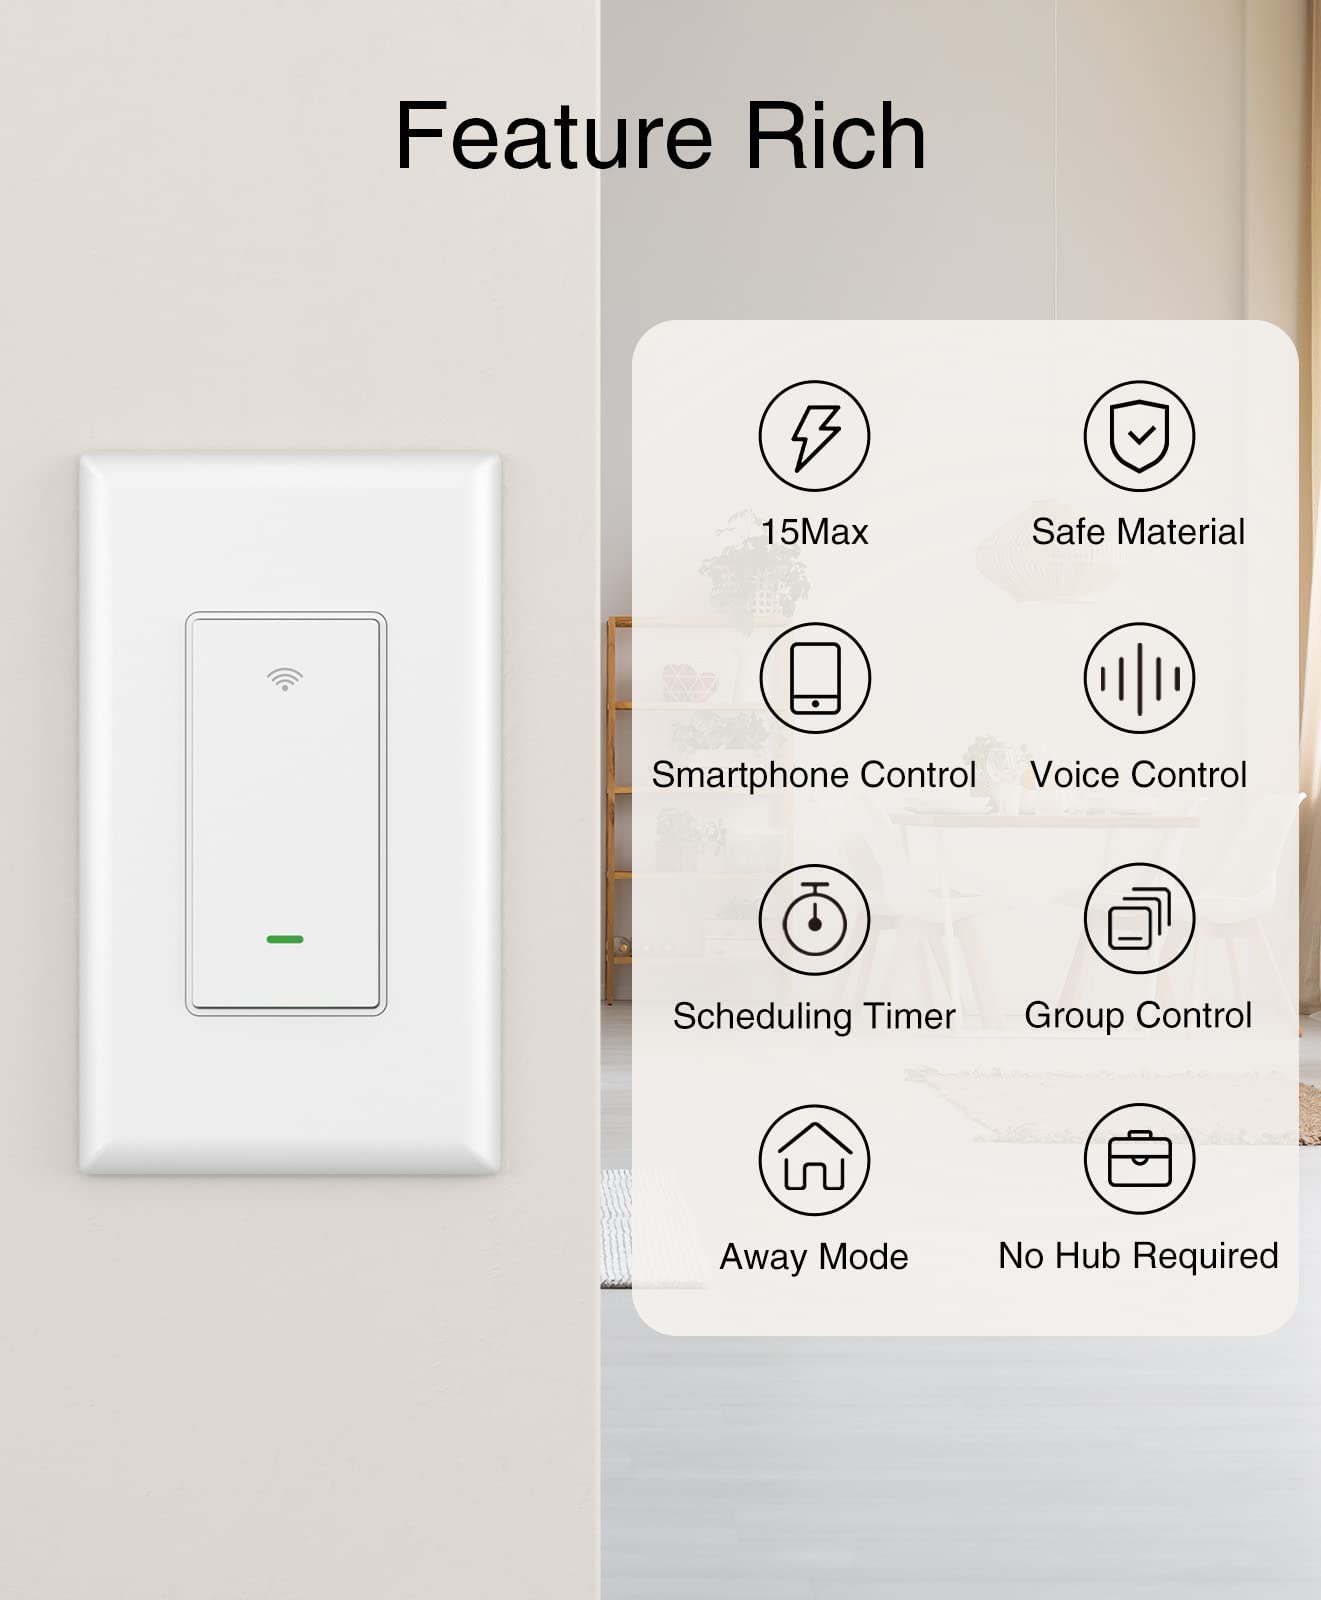 Smart Switch,Smart Wi-Fi Light Switch Compatible with Alexa and Google Assistant 2.4Ghz, Single-Pole,Neutral Wire Required,UL Certified,Voice Control and Schedule, No Hub Required (4 Pack)